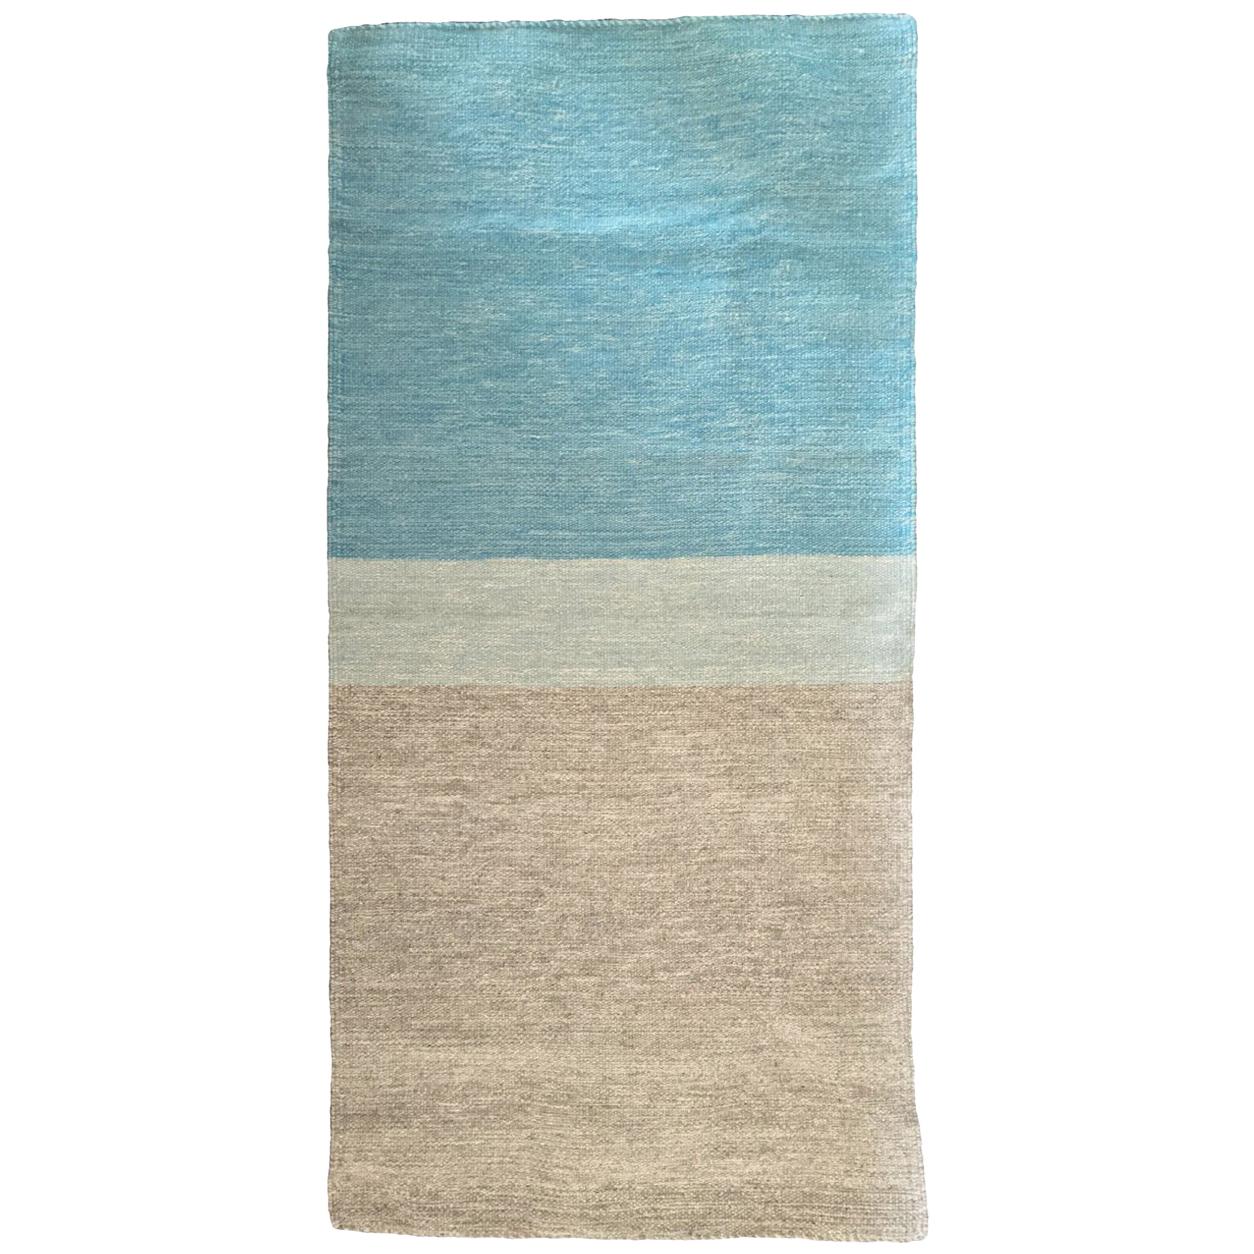 Blue and Grey Ombre Short Runner Rug, in Stock